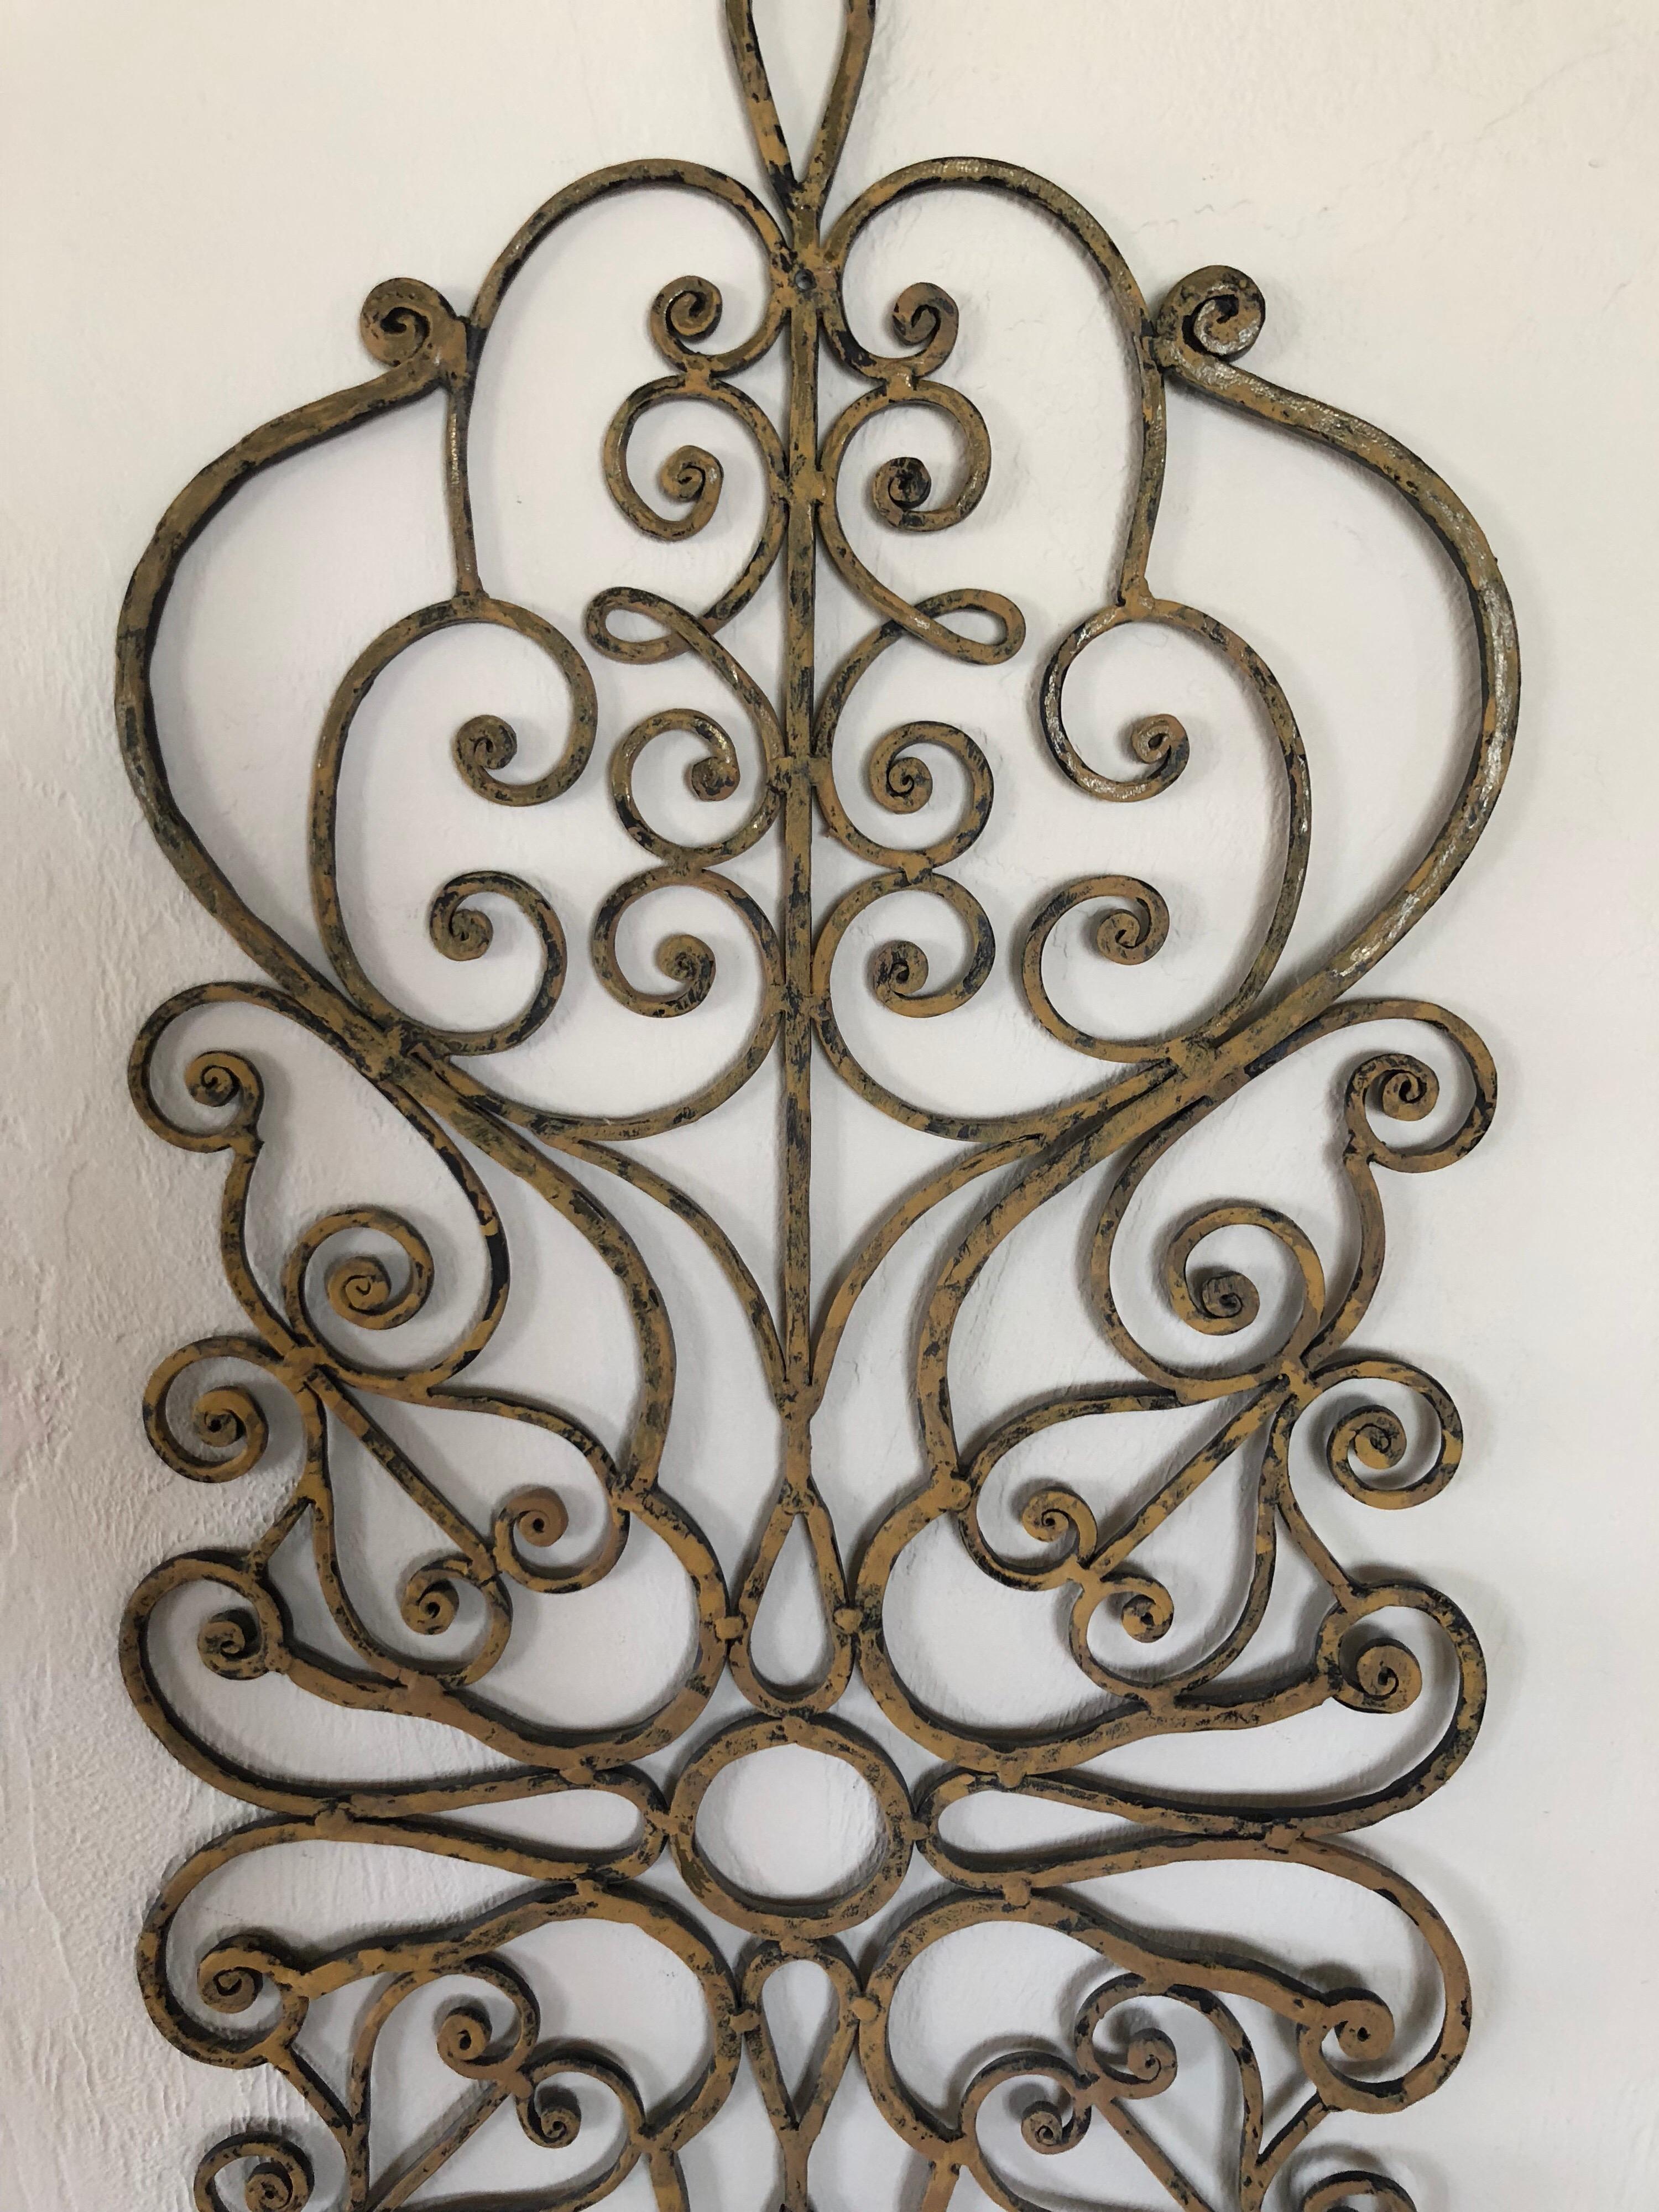 Large Hand-Wrought Iron Wall Sculpture 8